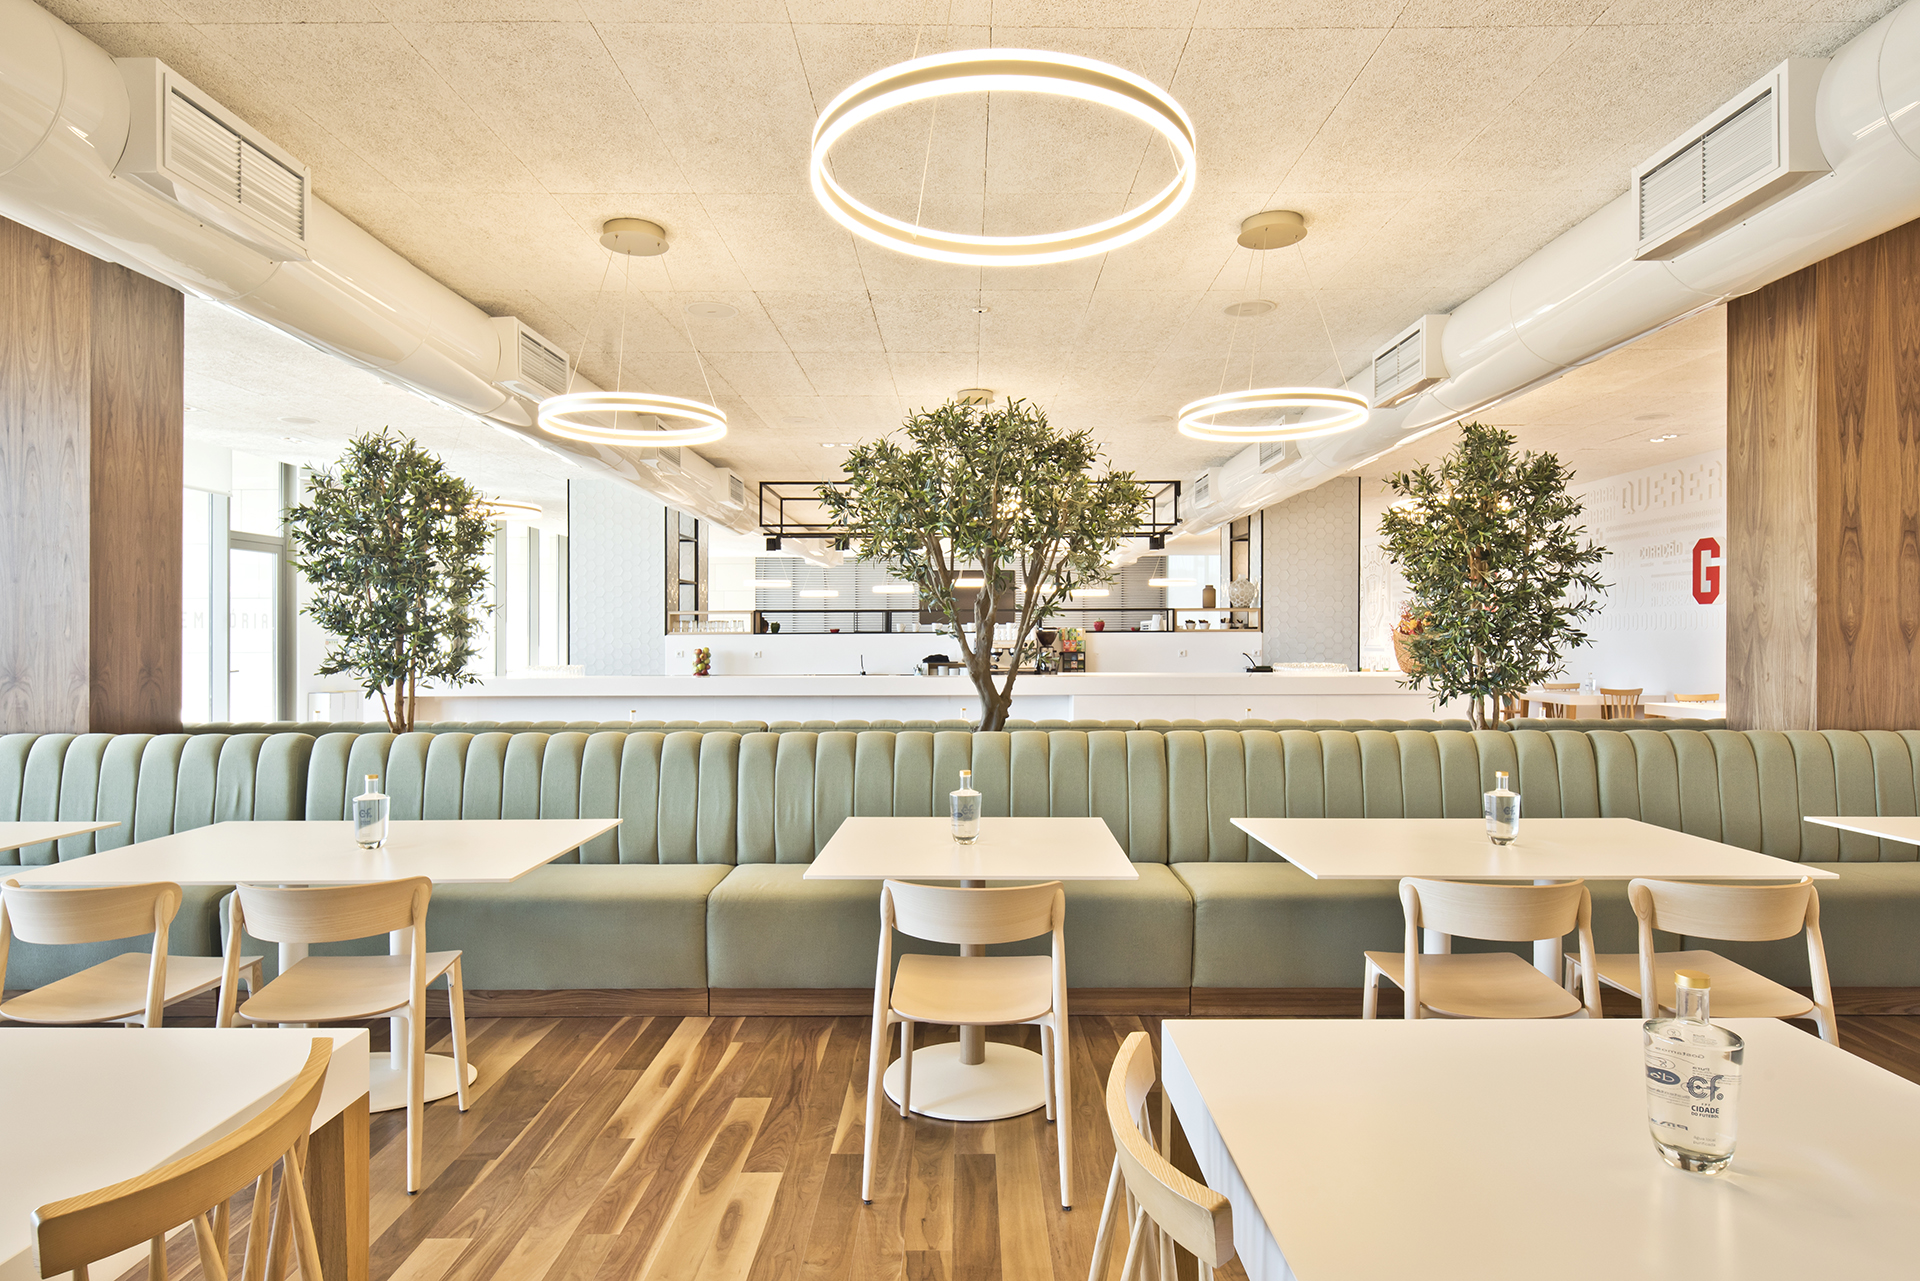 Through restaurant decoration we build functional and comfortable spaces.